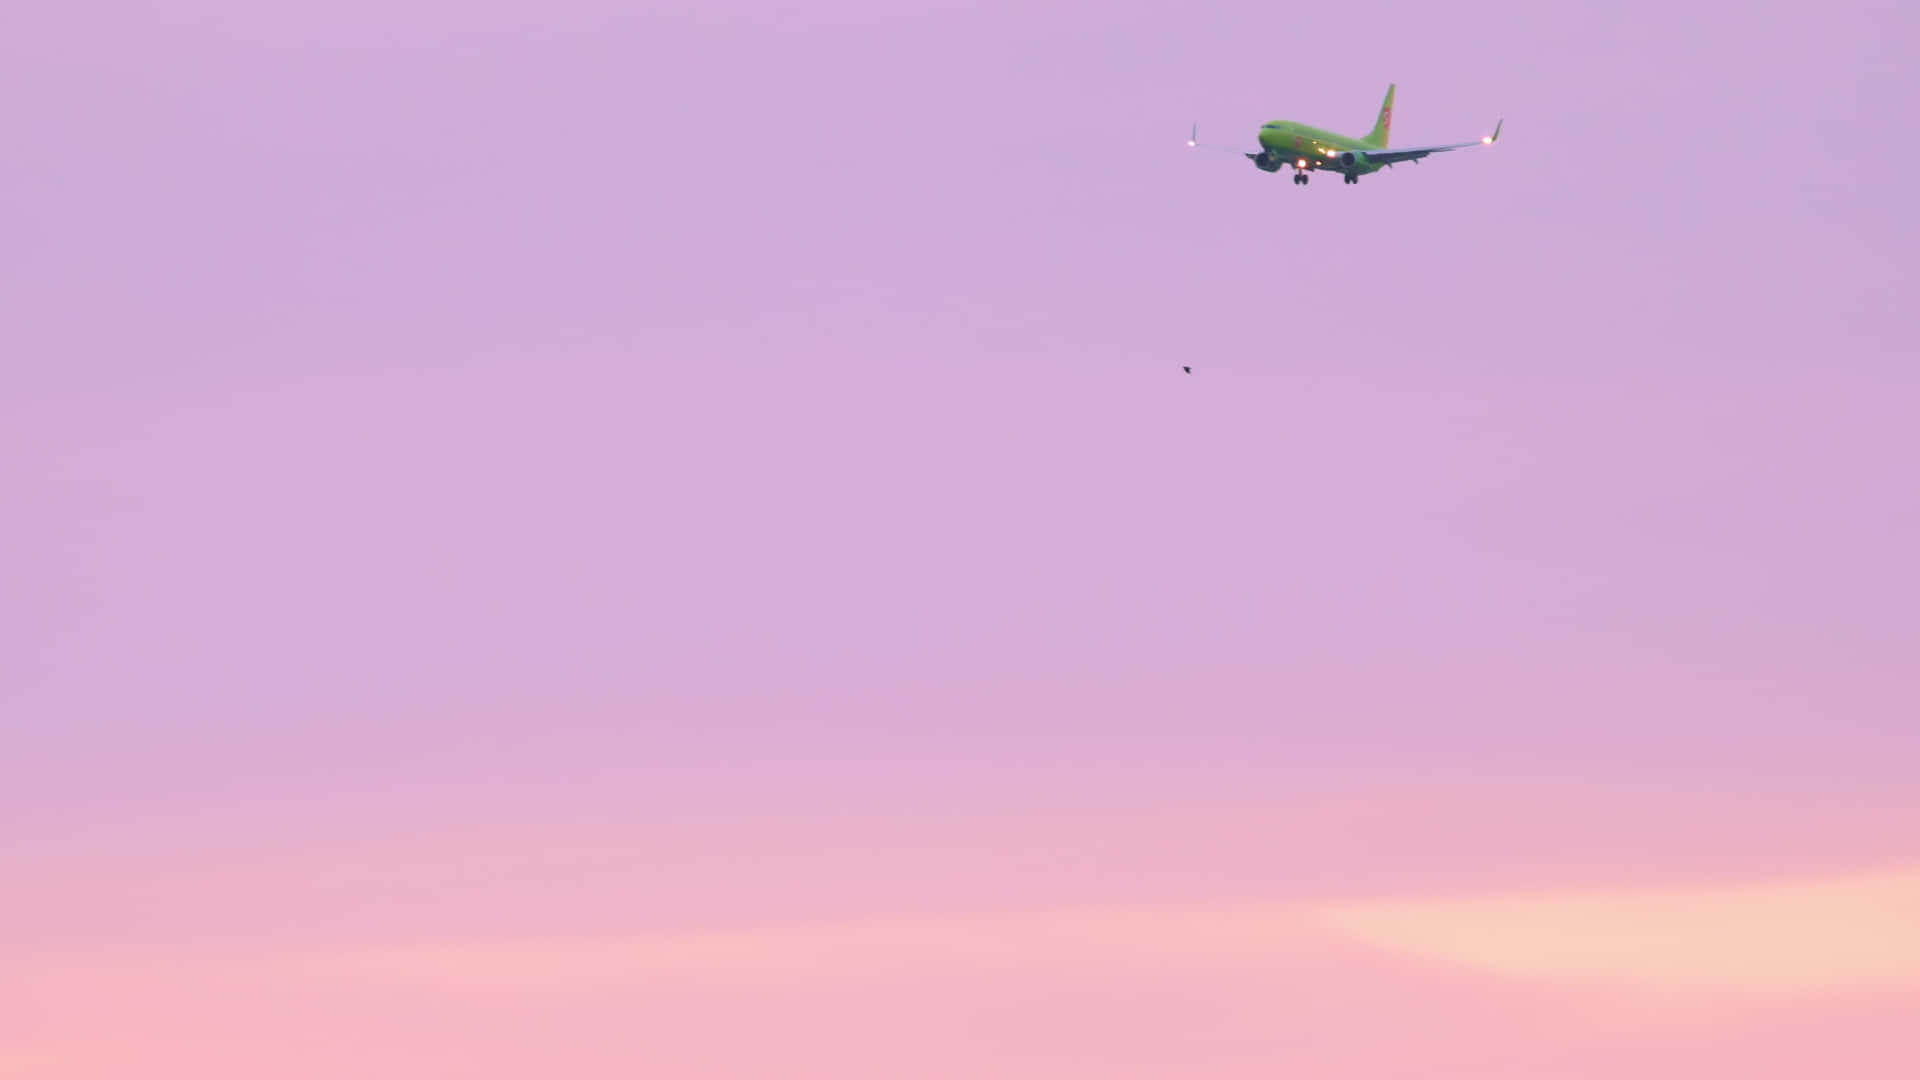 A bright pink plane taking off into the sky Wallpaper